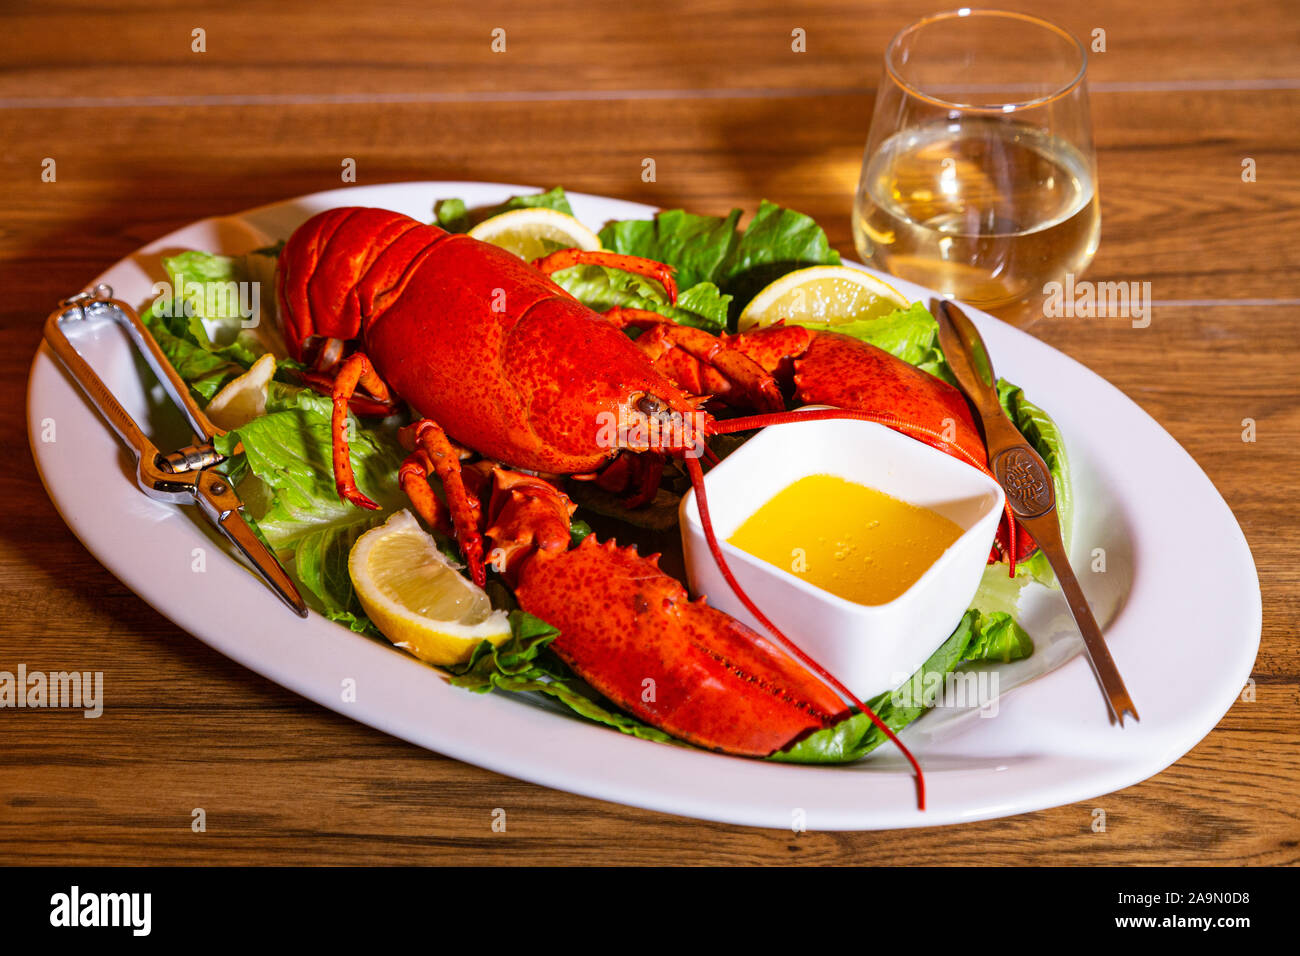 Cooked lobster on a white ceramic platter, romaine lettuce, lemon slices, melted butter, and white wine on the side in a stemless wine glass Stock Photo